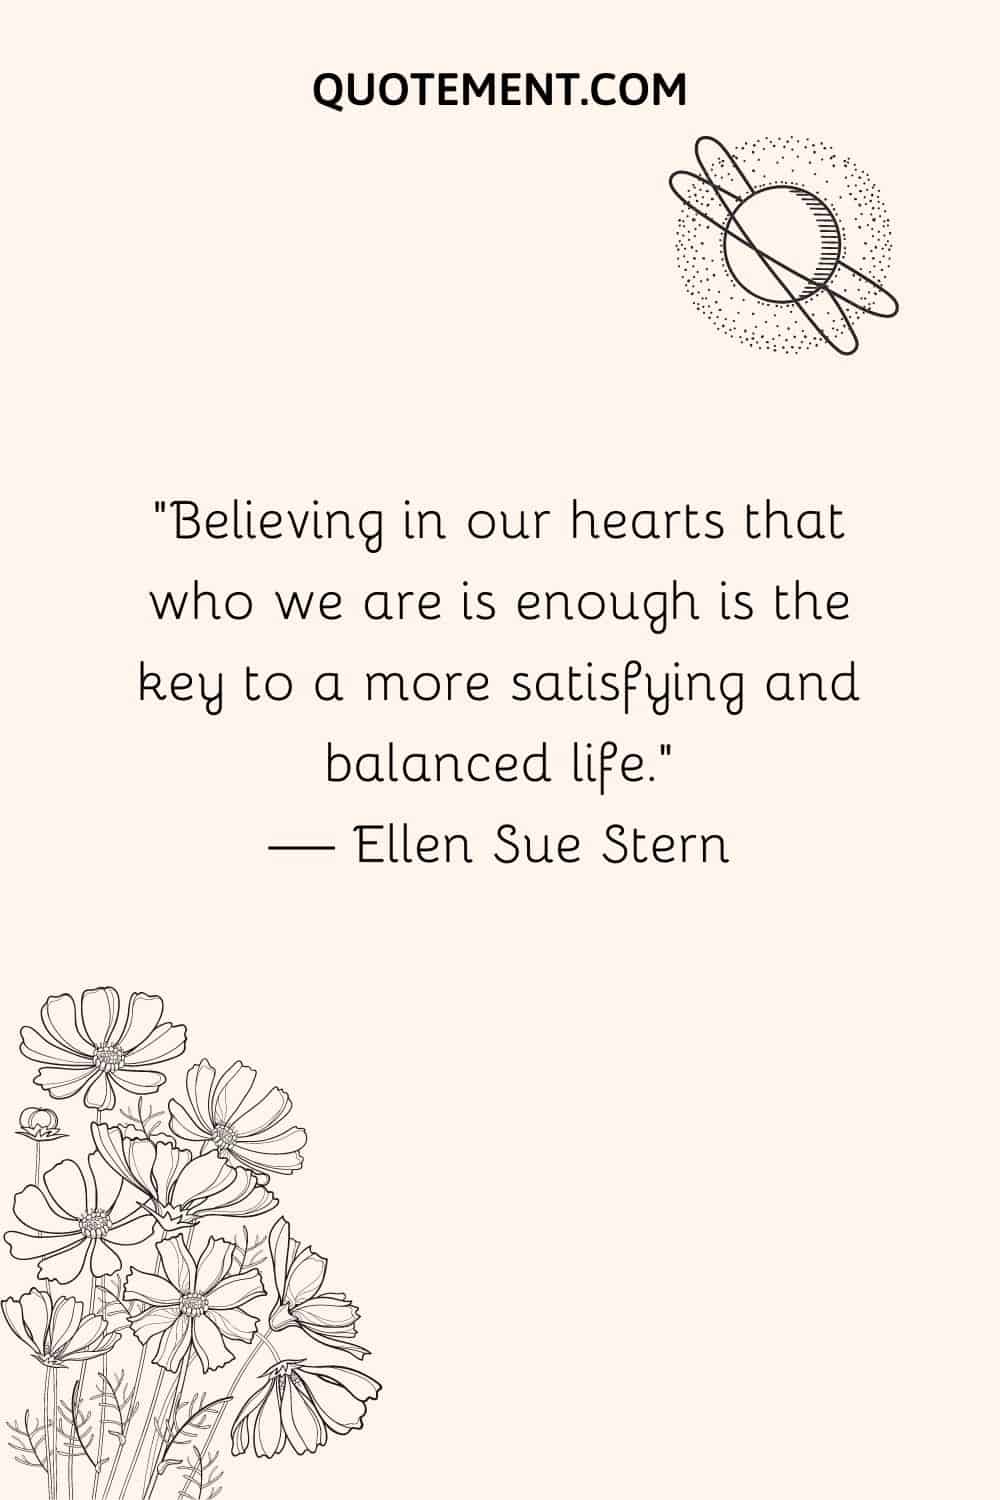 Believing in our hearts that who we are is enough is the key to a more satisfying and balanced life